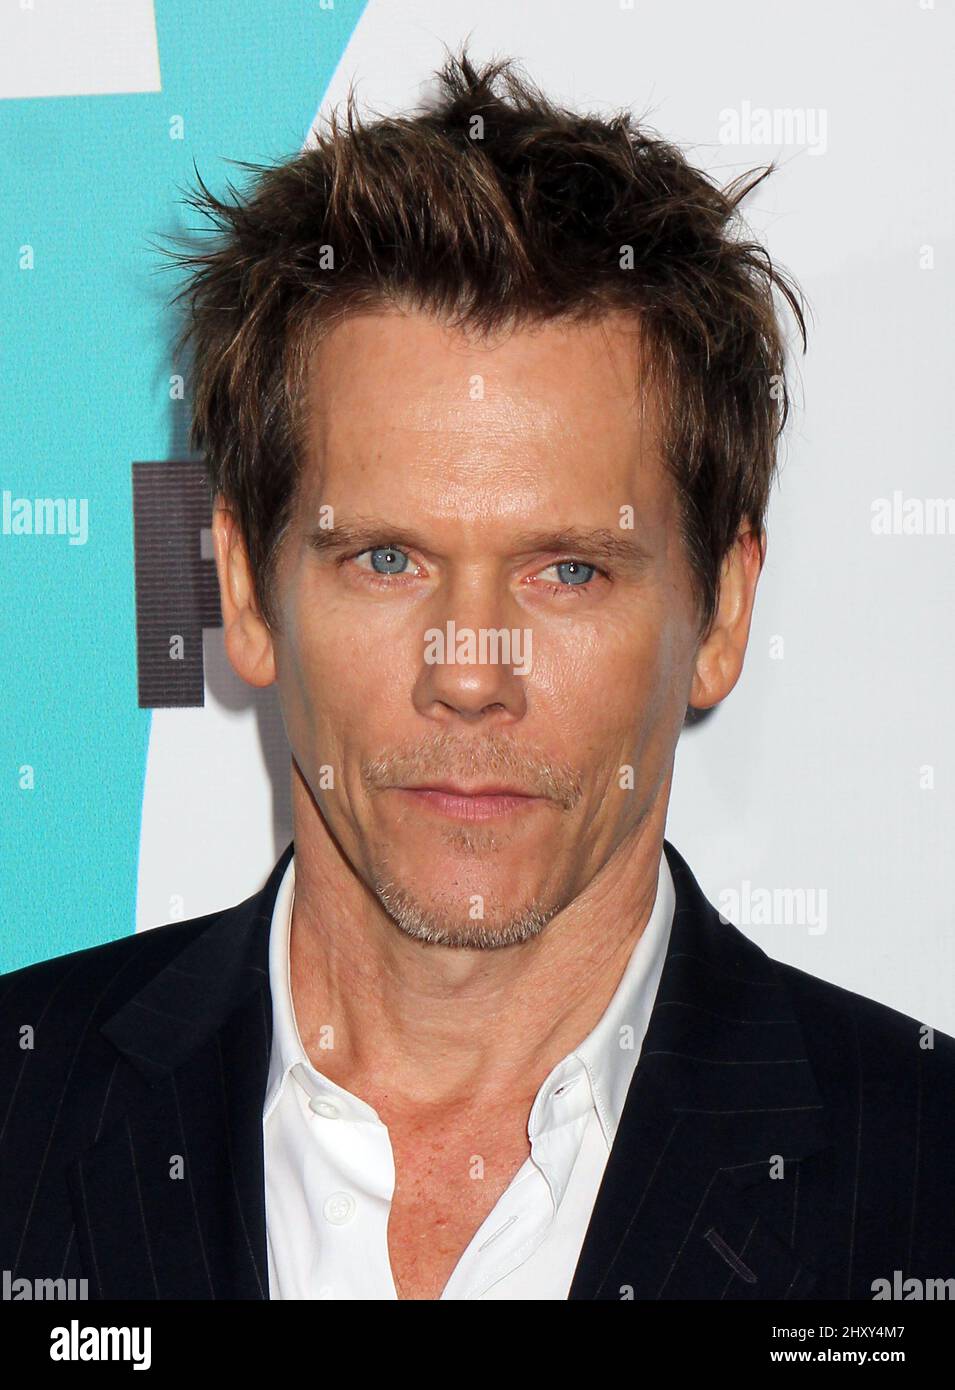 Kevin Bacon attends the FOX 2012 Upfront presentation held at Wollman Rink in Central Park. Stock Photo